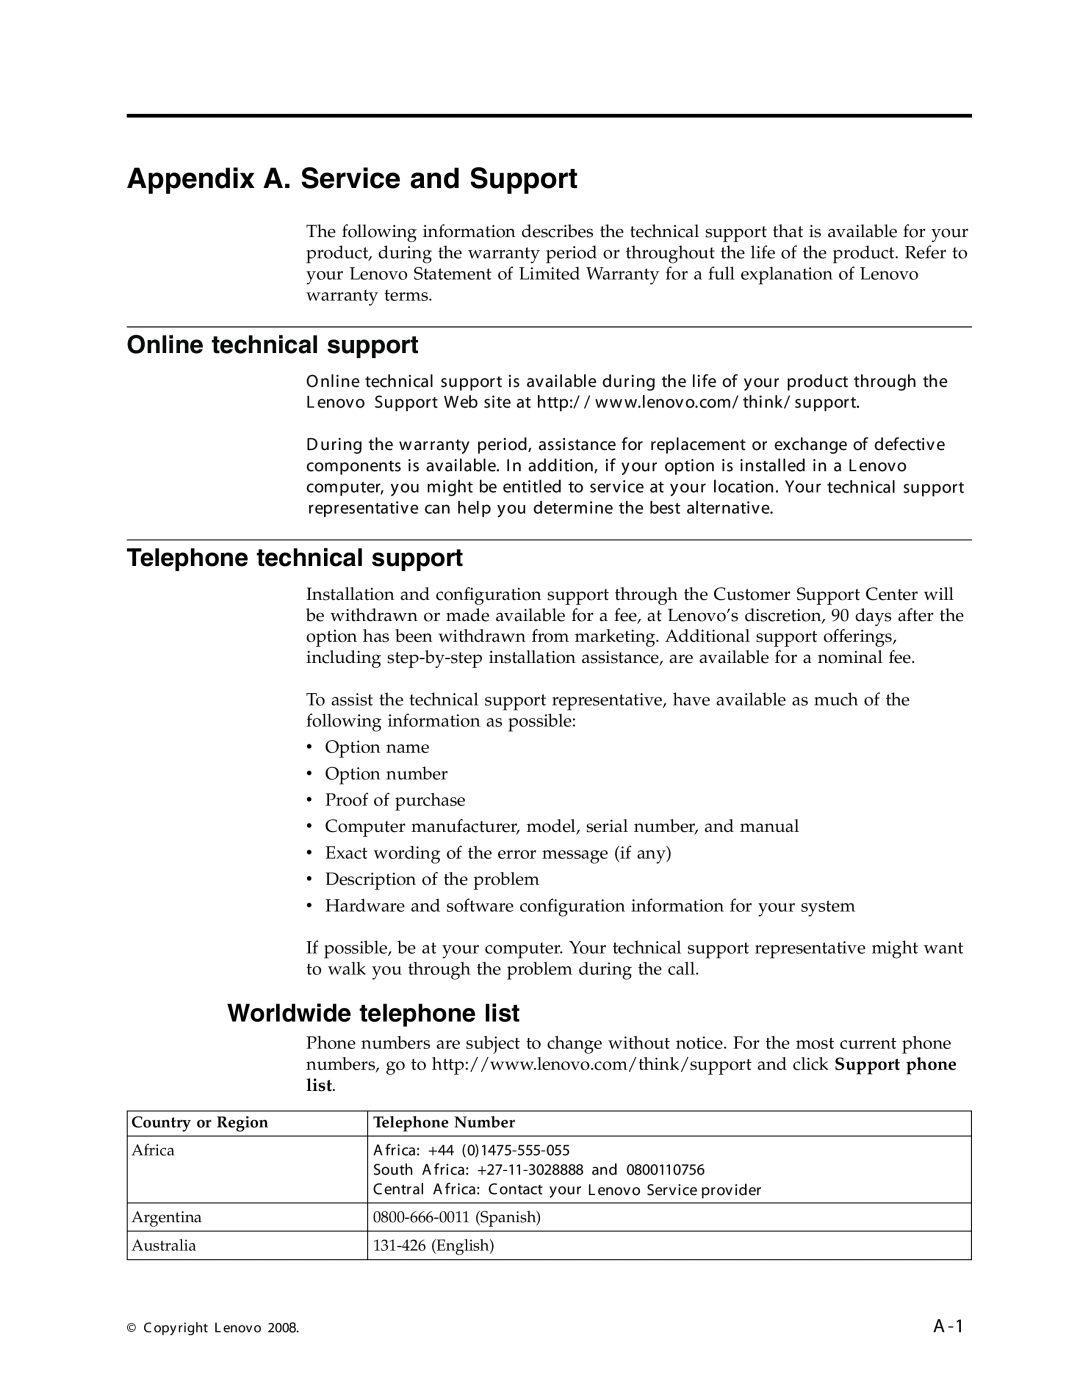 Lenovo L195 WIDE manual Appendix A. Service and Support, Online technical support, Telephone technical support 